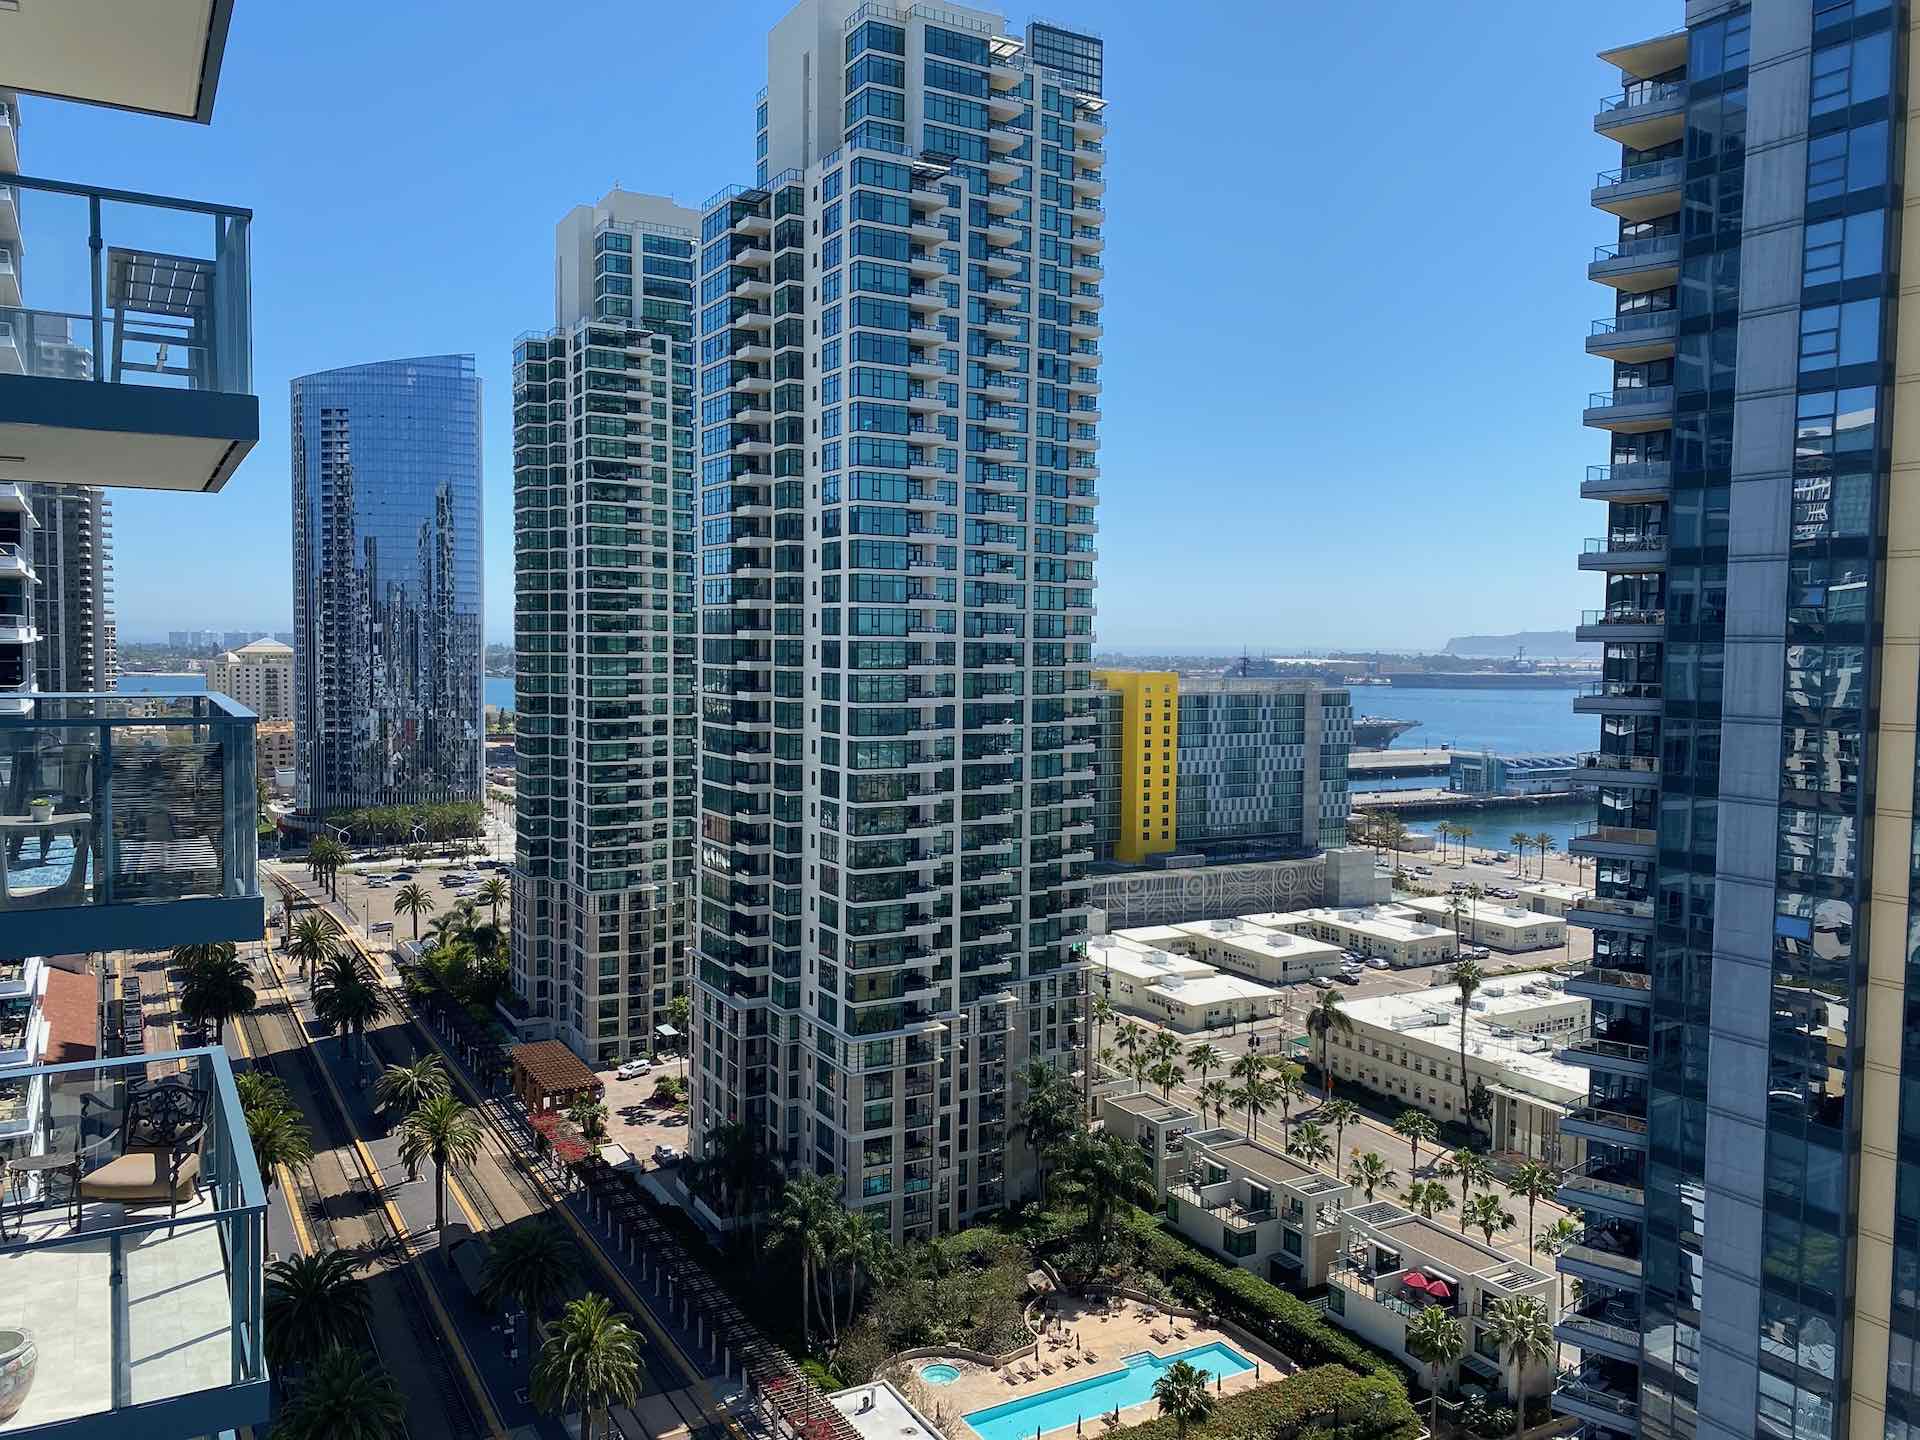 The Grande condo towers in downtown San Diego Columbia District